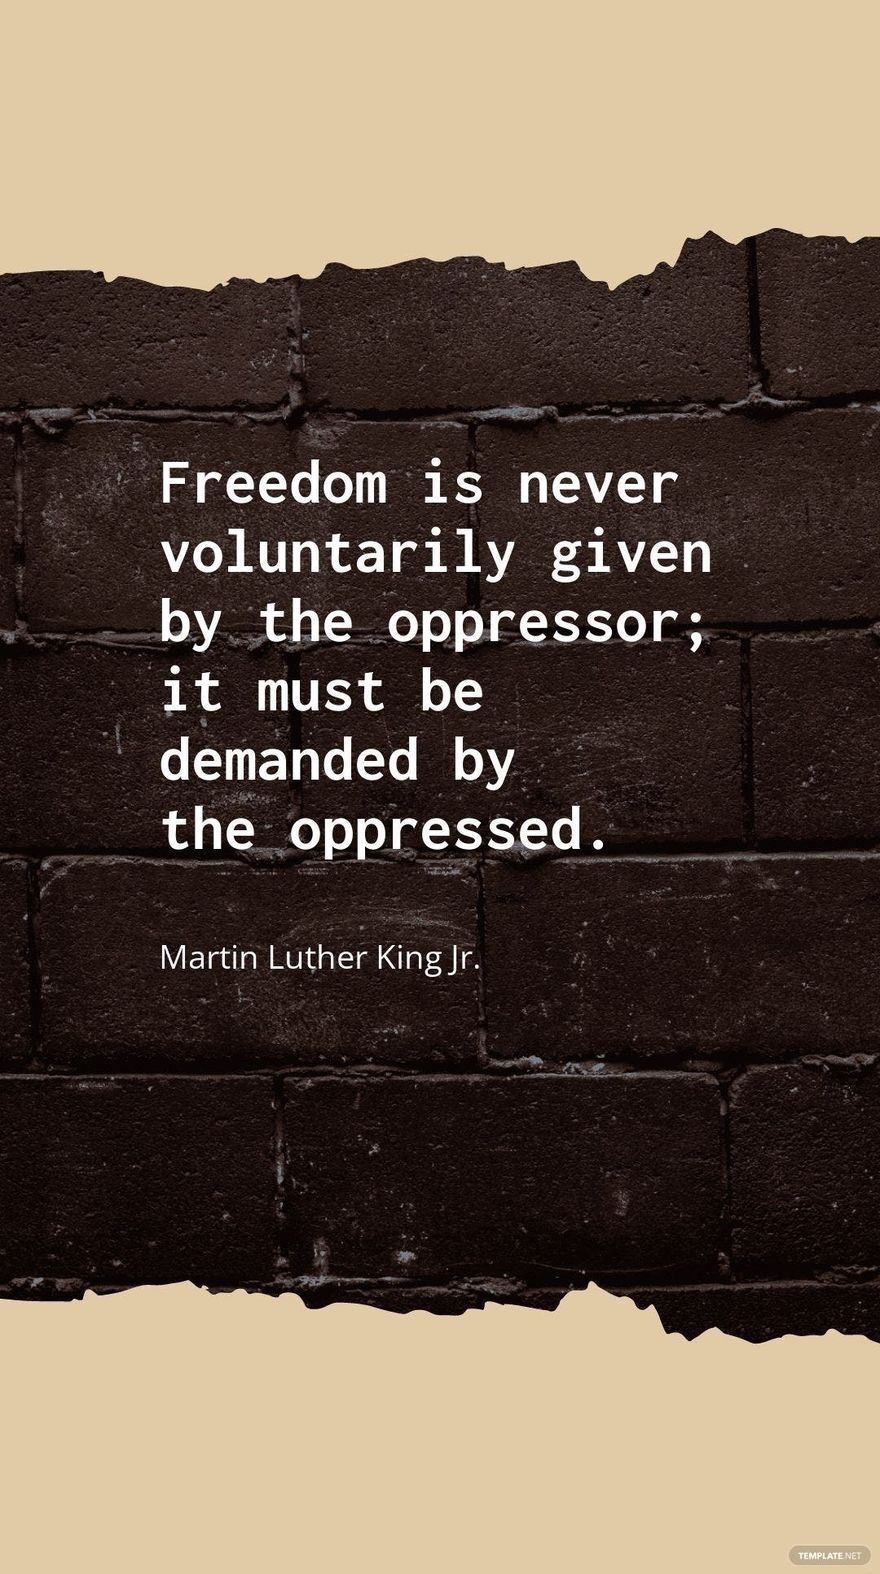 Martin Luther King Jr. - Freedom is never voluntarily given by the oppressor; it must be demanded by the oppressed.